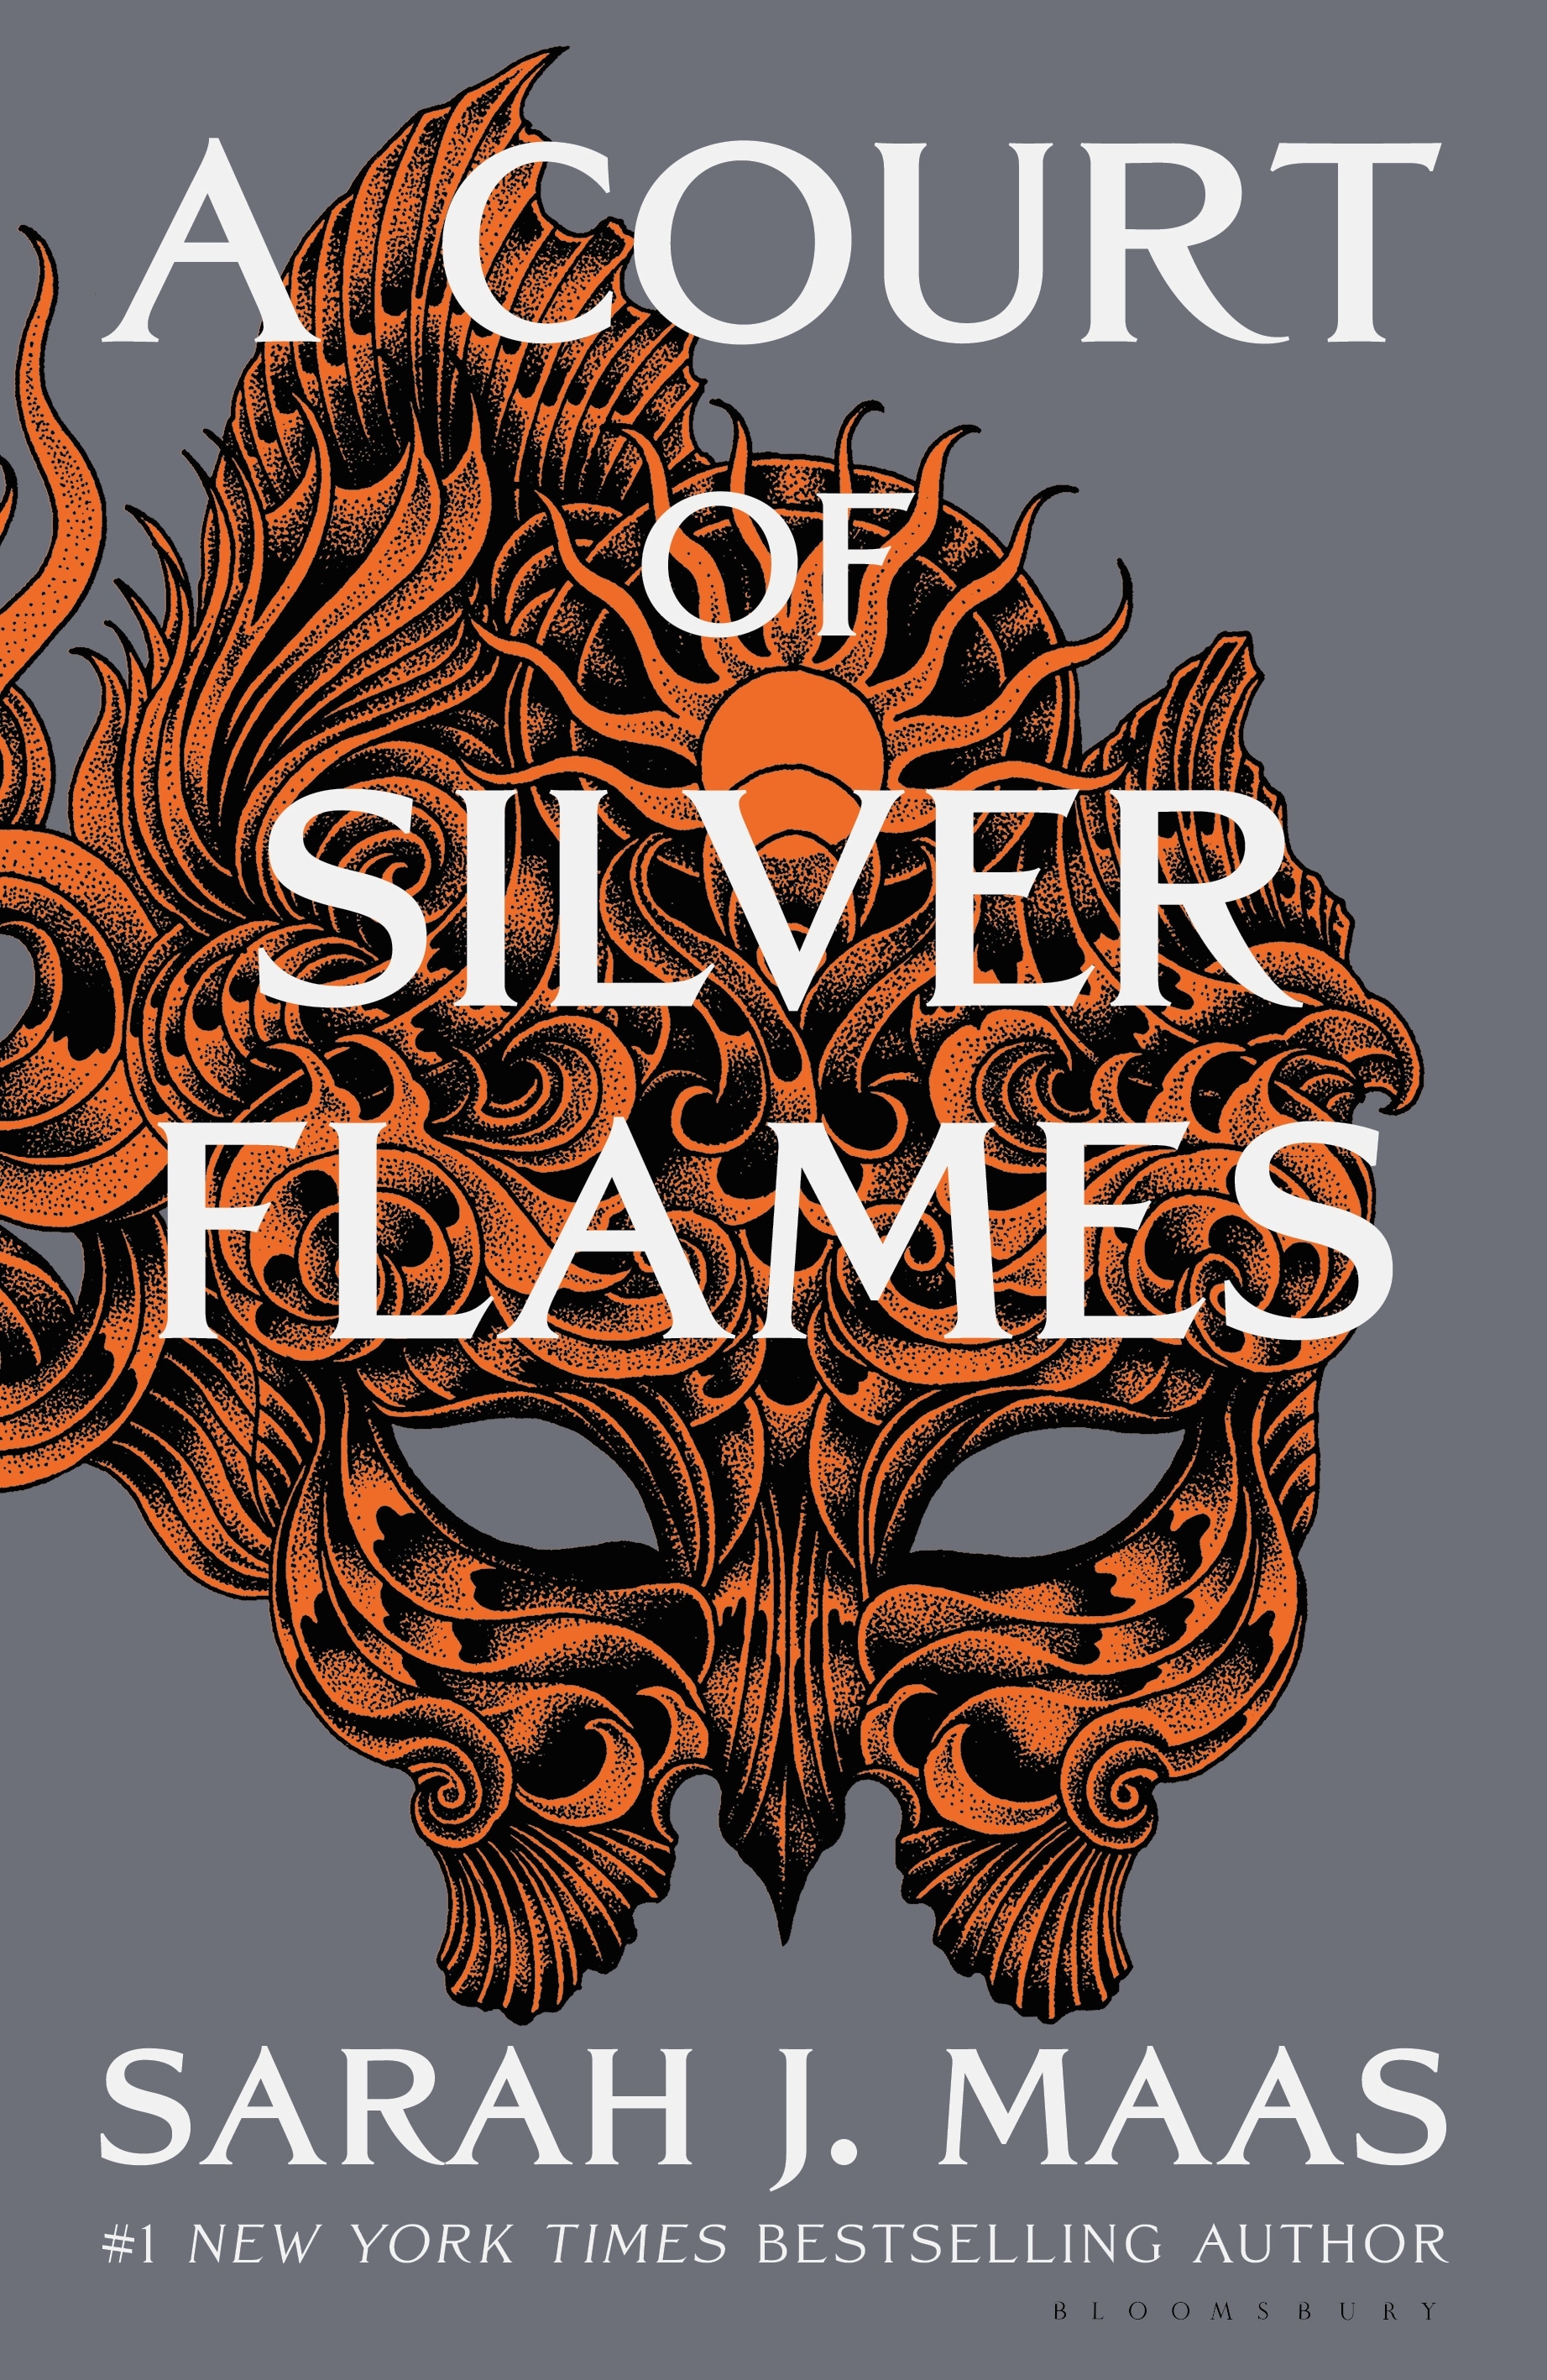 Book “A Court of Silver Flames” by Sarah J. Maas